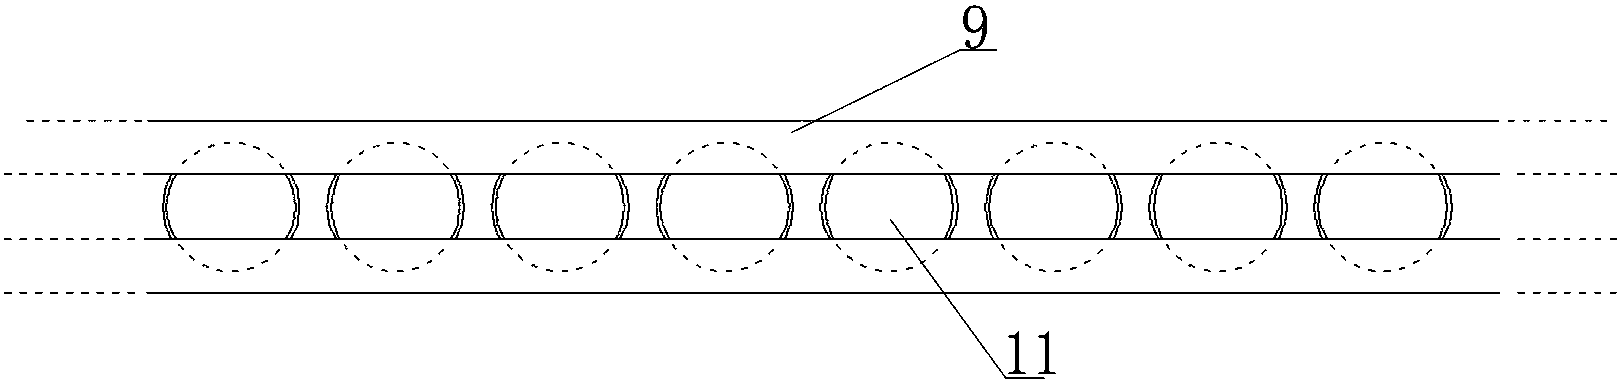 Stable chassis guide rail bracket